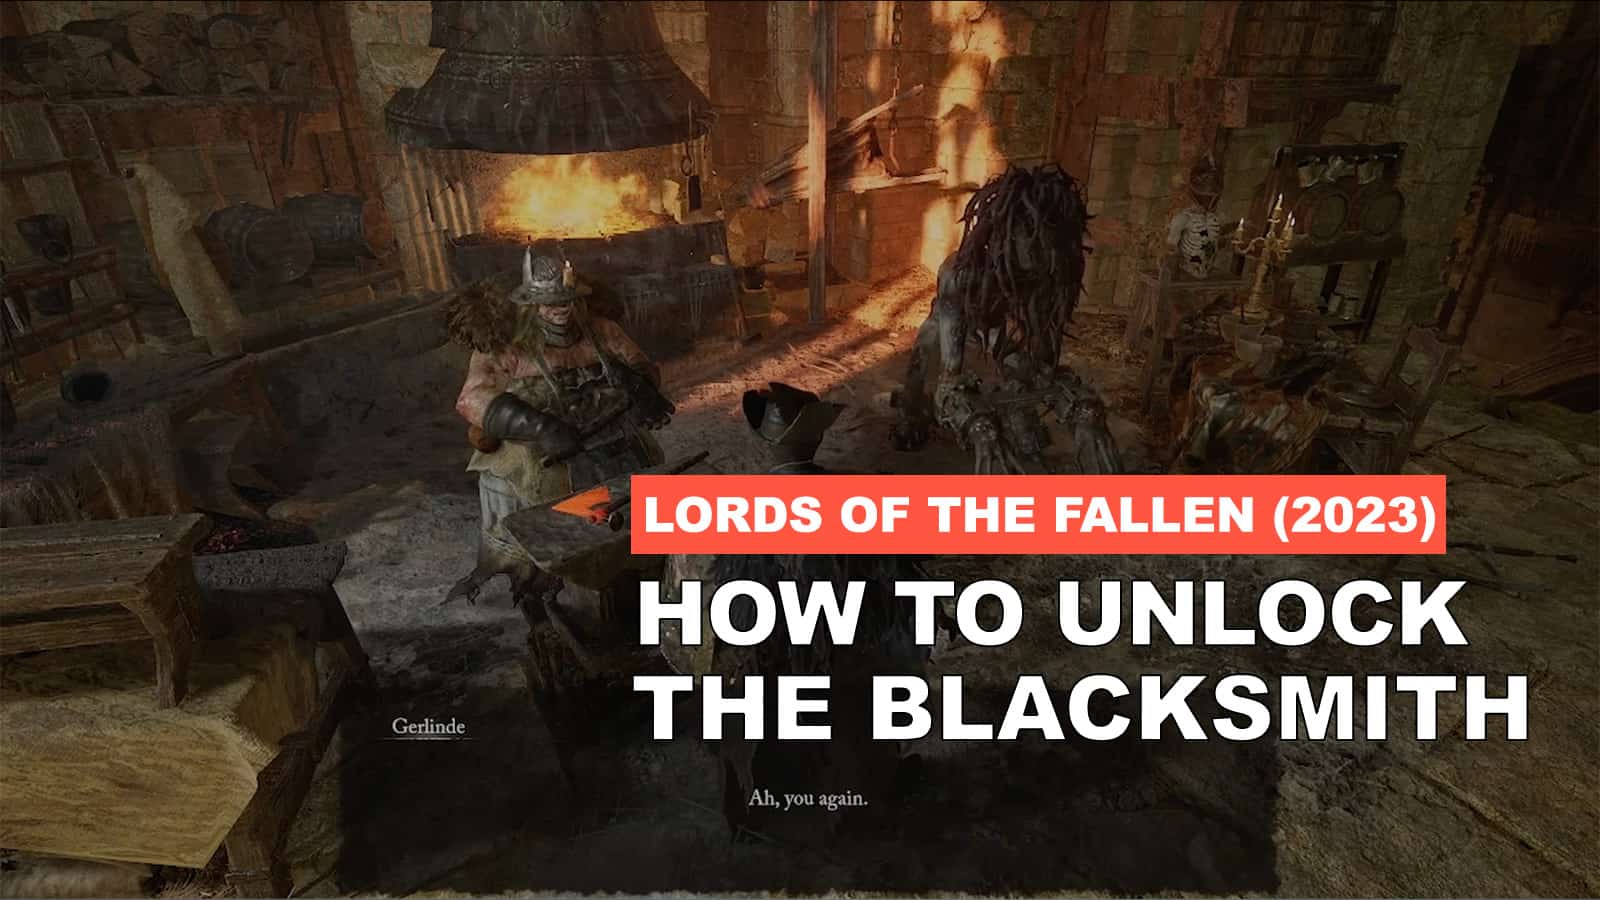 How To Unlock The Blacksmith And Weapon Upgrades In Lords Of The Fallen (2023)